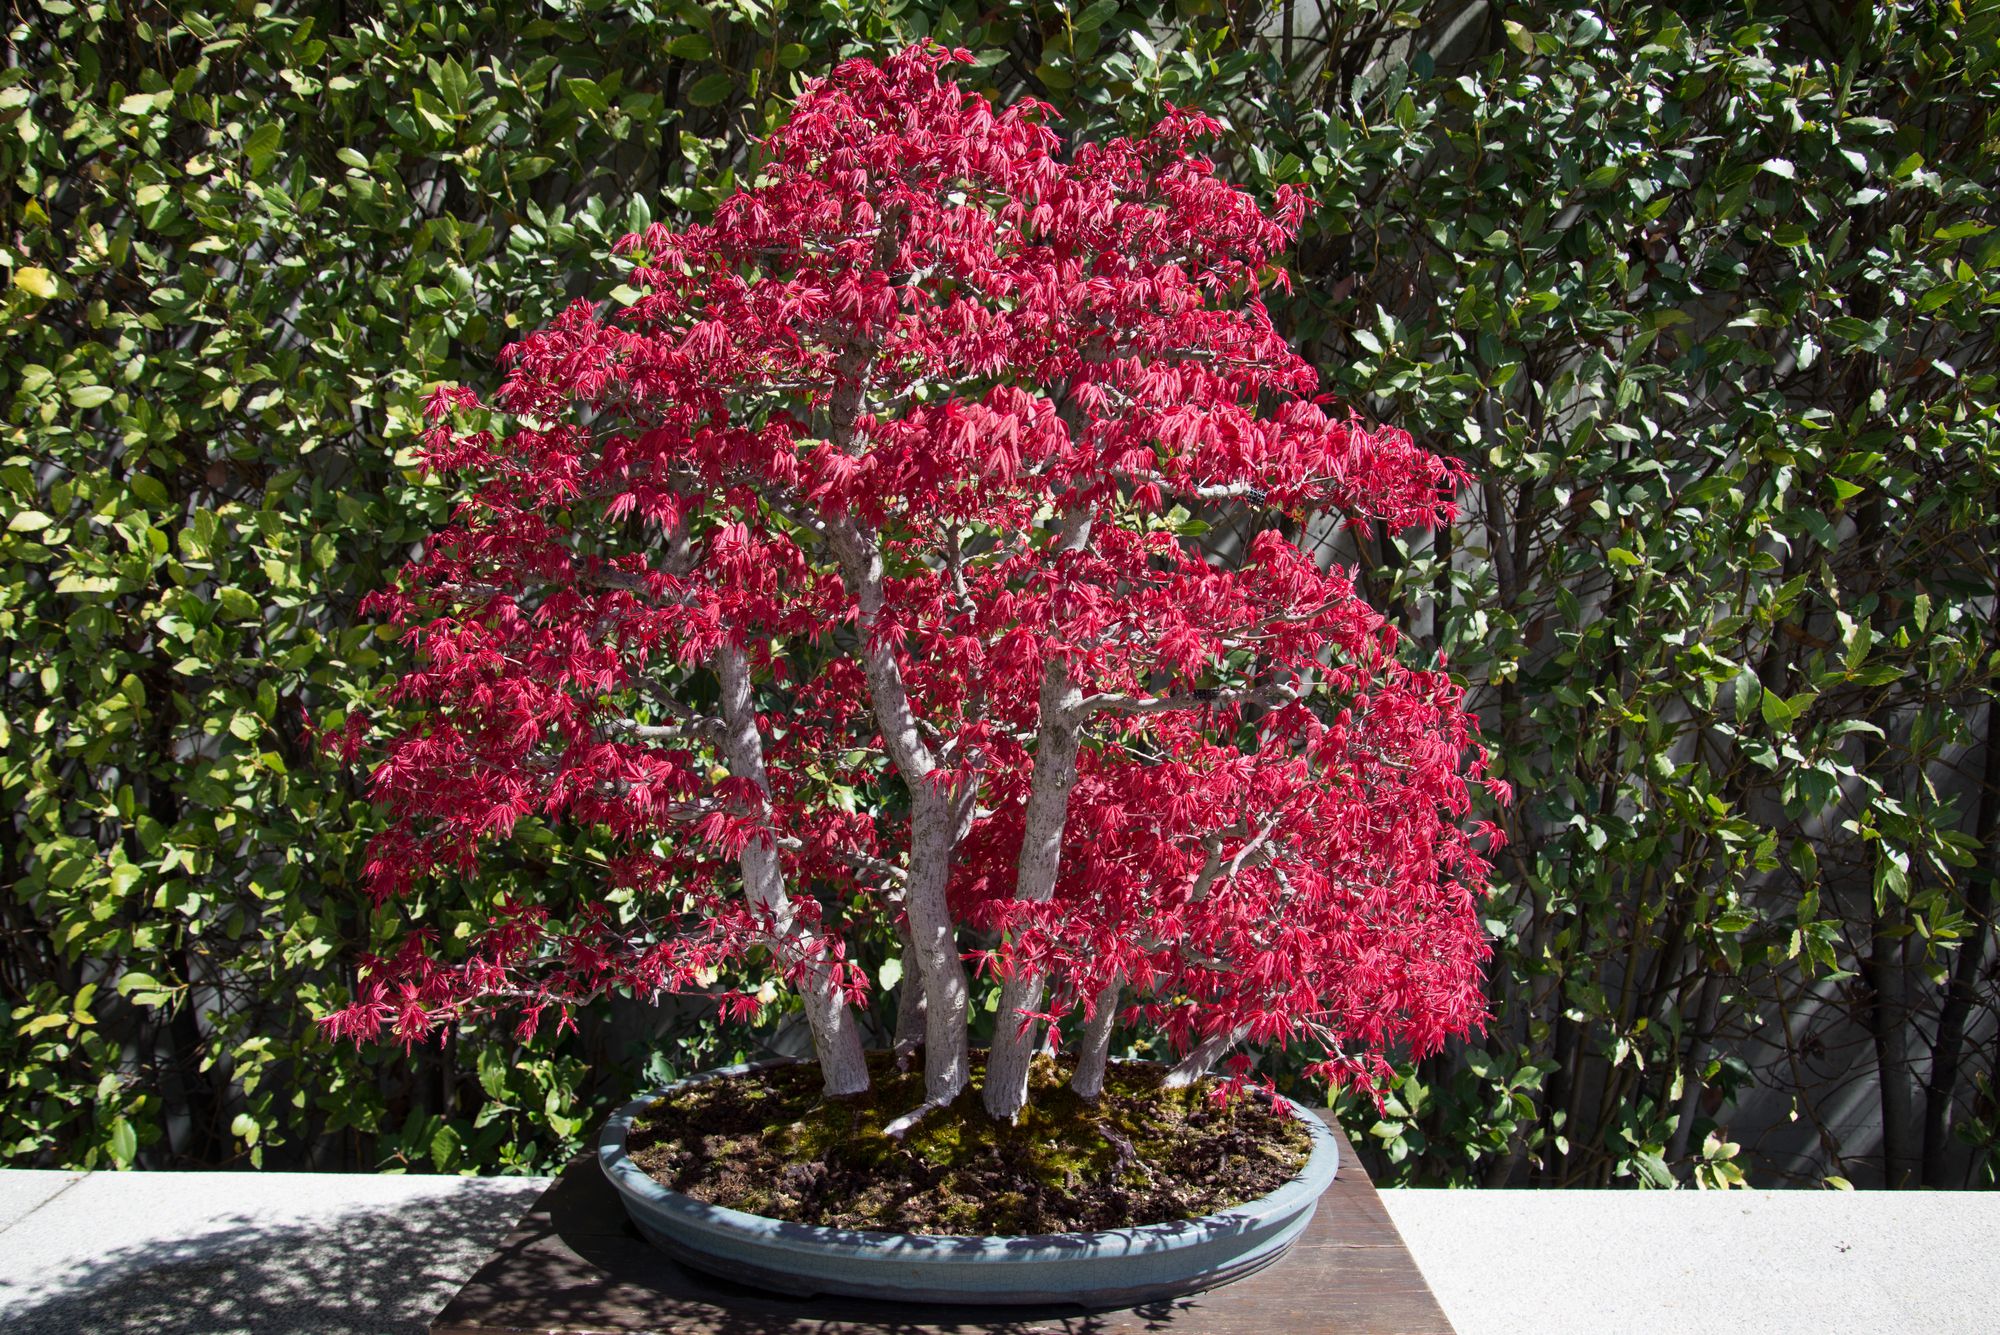 Maroon colored leaves of a bonsai tree with white trunk planted in a round flat surface